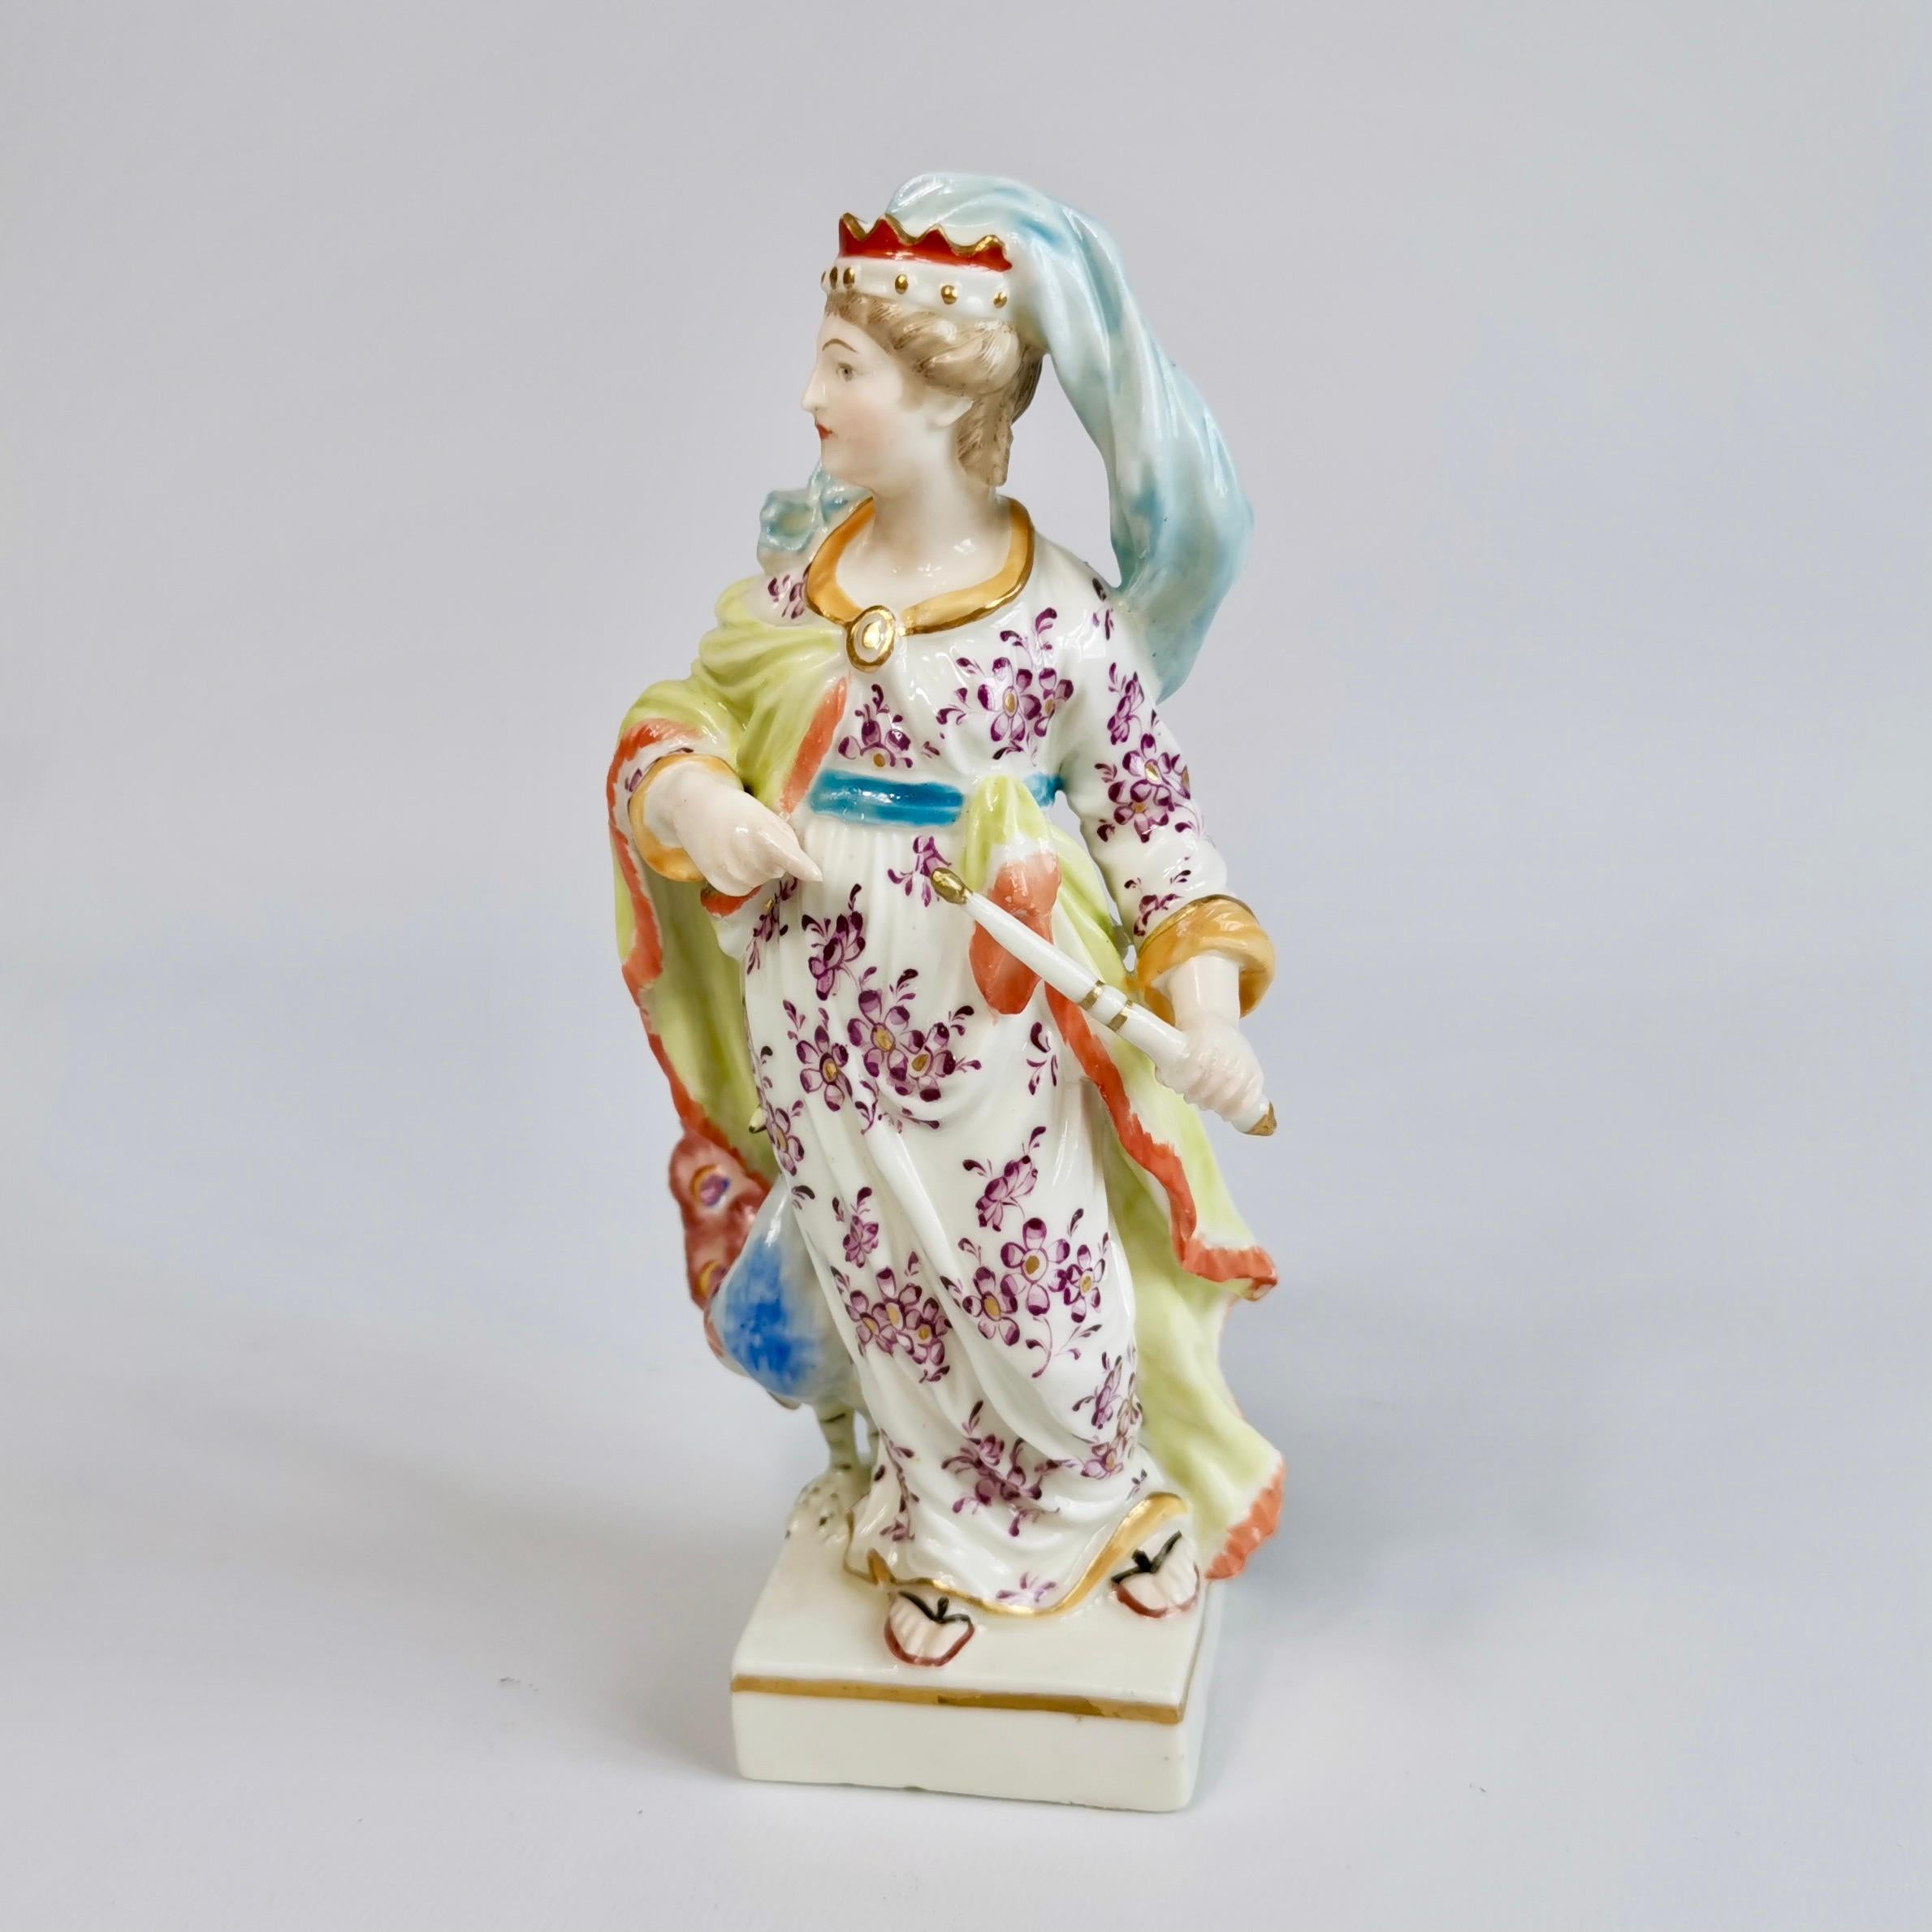 This is a beautiful porcelain figure of Juno with a peacock, made by Derby around the year 1780. 
 
The Derby Porcelain factory has its roots in the late 1740s, when Andrew Planché, a Walloon Huguenot refugee, started making simple porcelain toys